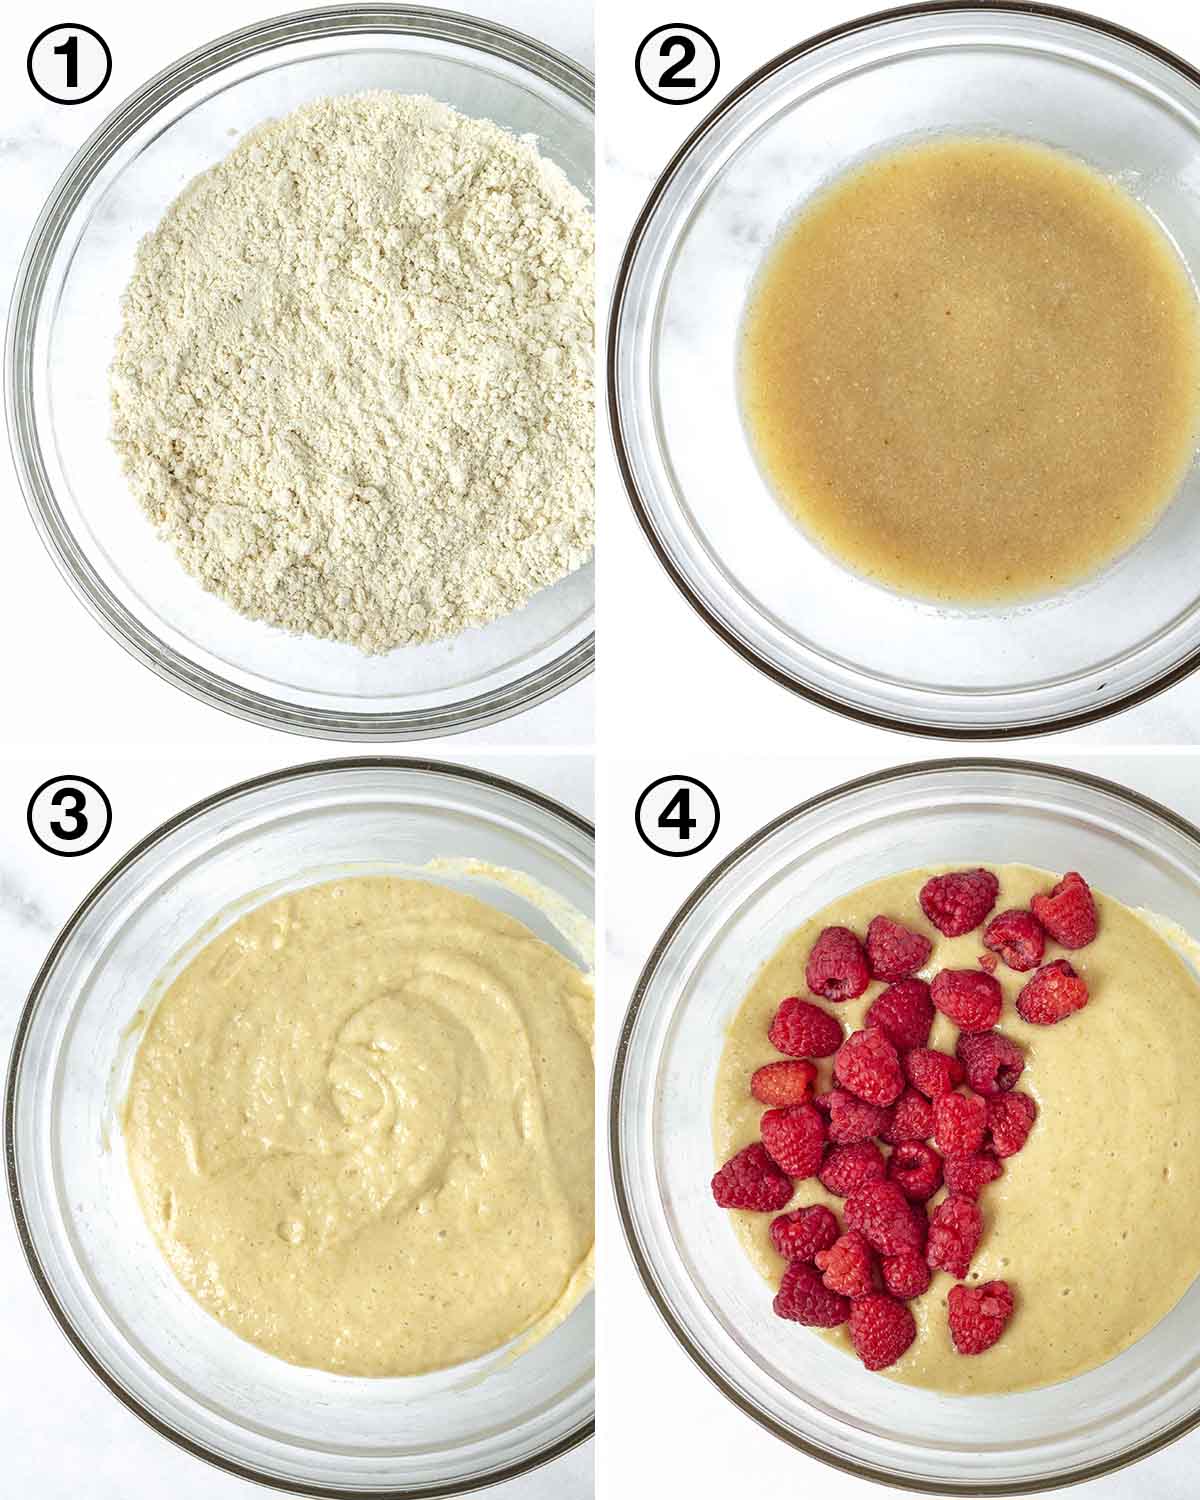 A collage of four images showing the first sequence of steps needed to make vegan gluten-free raspberry muffins.